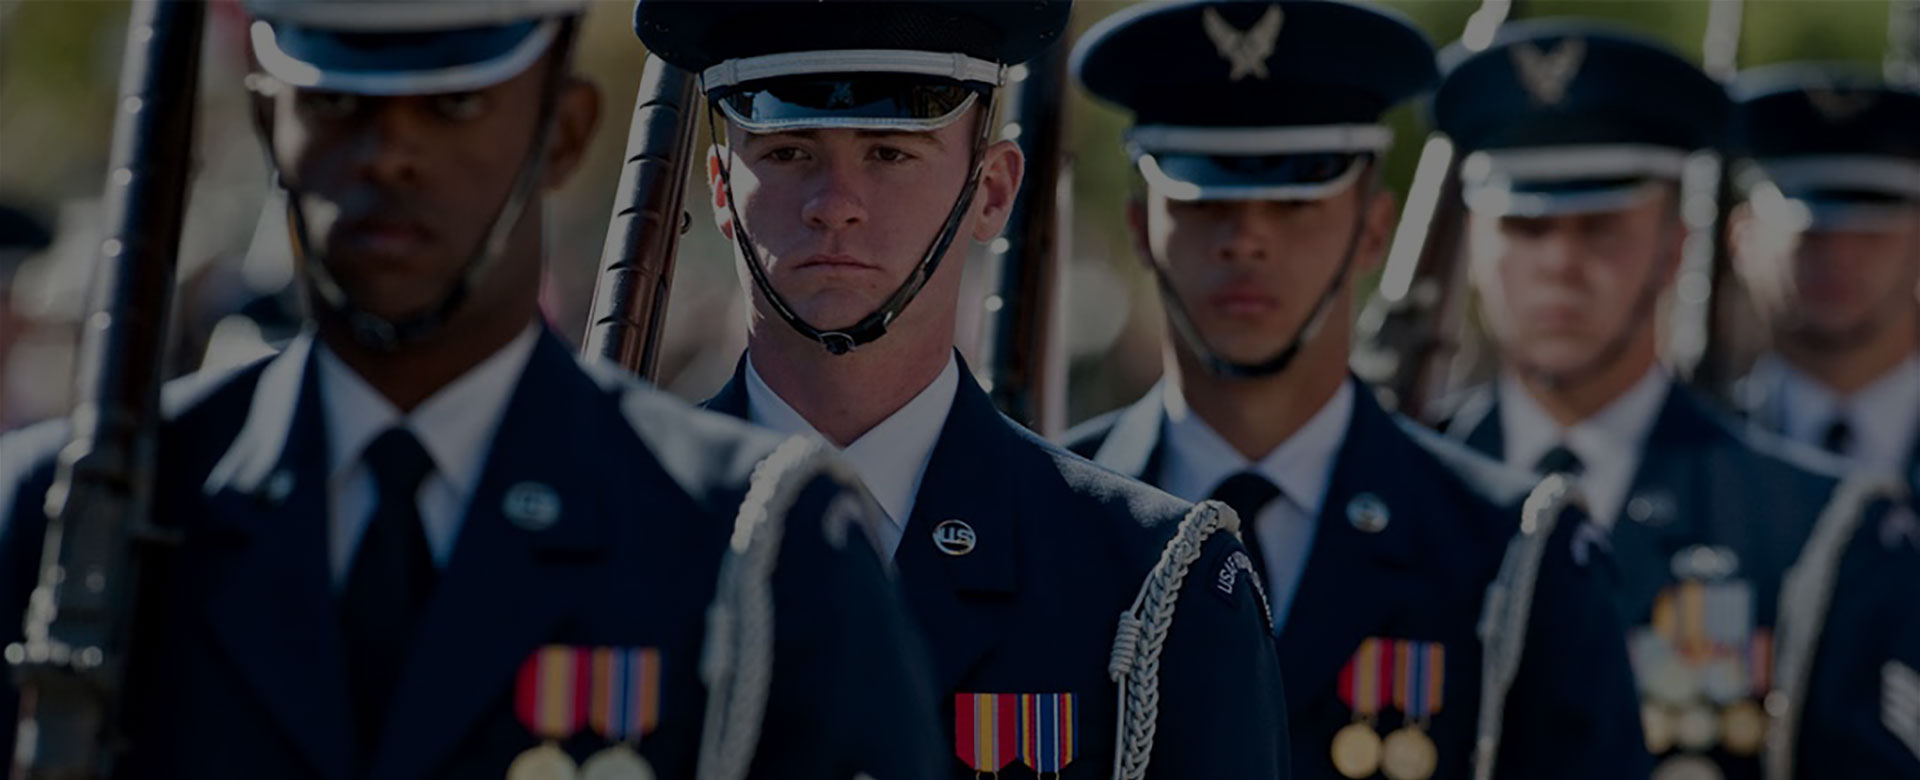 Air Force (CJQS): Command Job Qualifications Standard. Automated. Efficient. Effective.